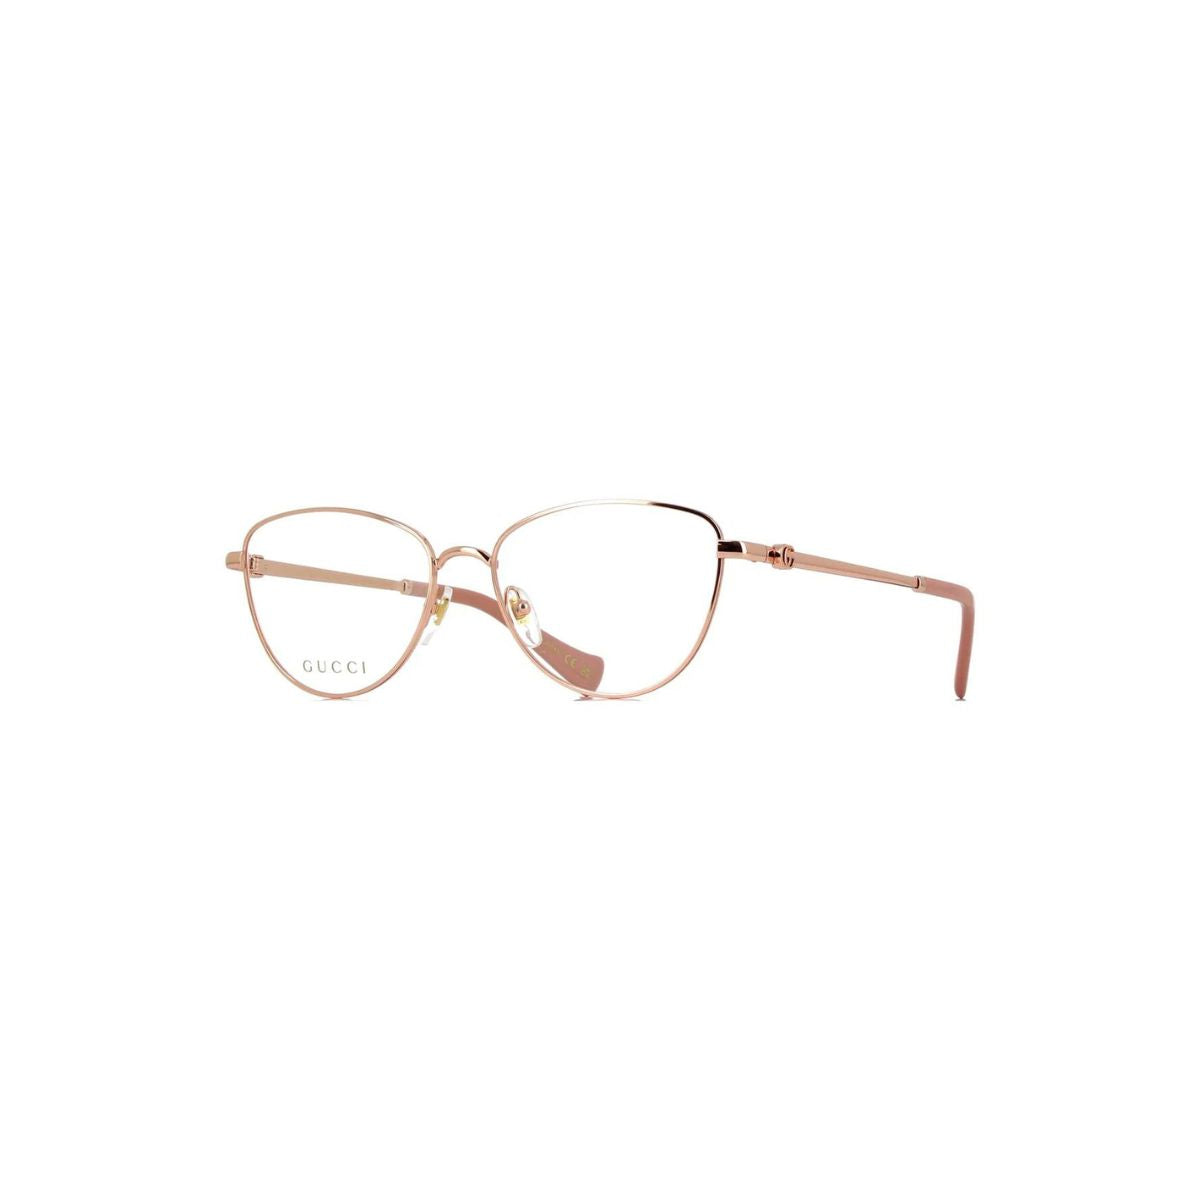 "Gucci GG1595O 002 spectacle eyewear frame for women's online at optorium"